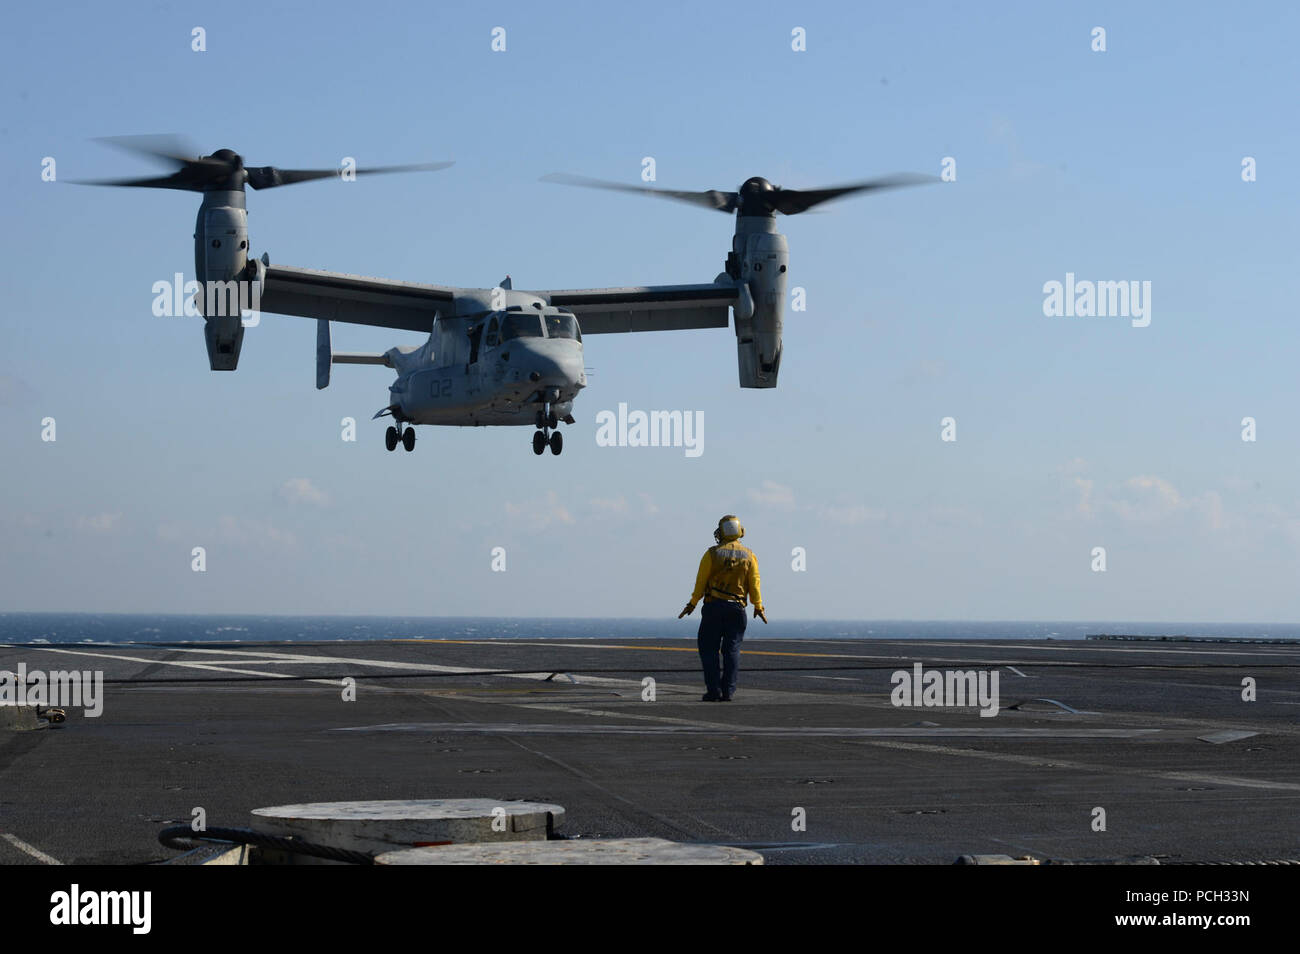 ATLANTIC OCEAN (Jan. 29, 2013) Aviation Boatswain's Mate (Handling) 2nd Class Luiz Diaz signals to an MV-22 Osprey from Marine Tiltrotor Operational Test and Evaluation Squadron (VMX) 22 as it prepares to land on the flight deck of the aircraft carrier USS George H.W. Bush (CVN 77). George H.W. Bush is conducting training and carrier qualifications in the Atlantic Ocean. Stock Photo